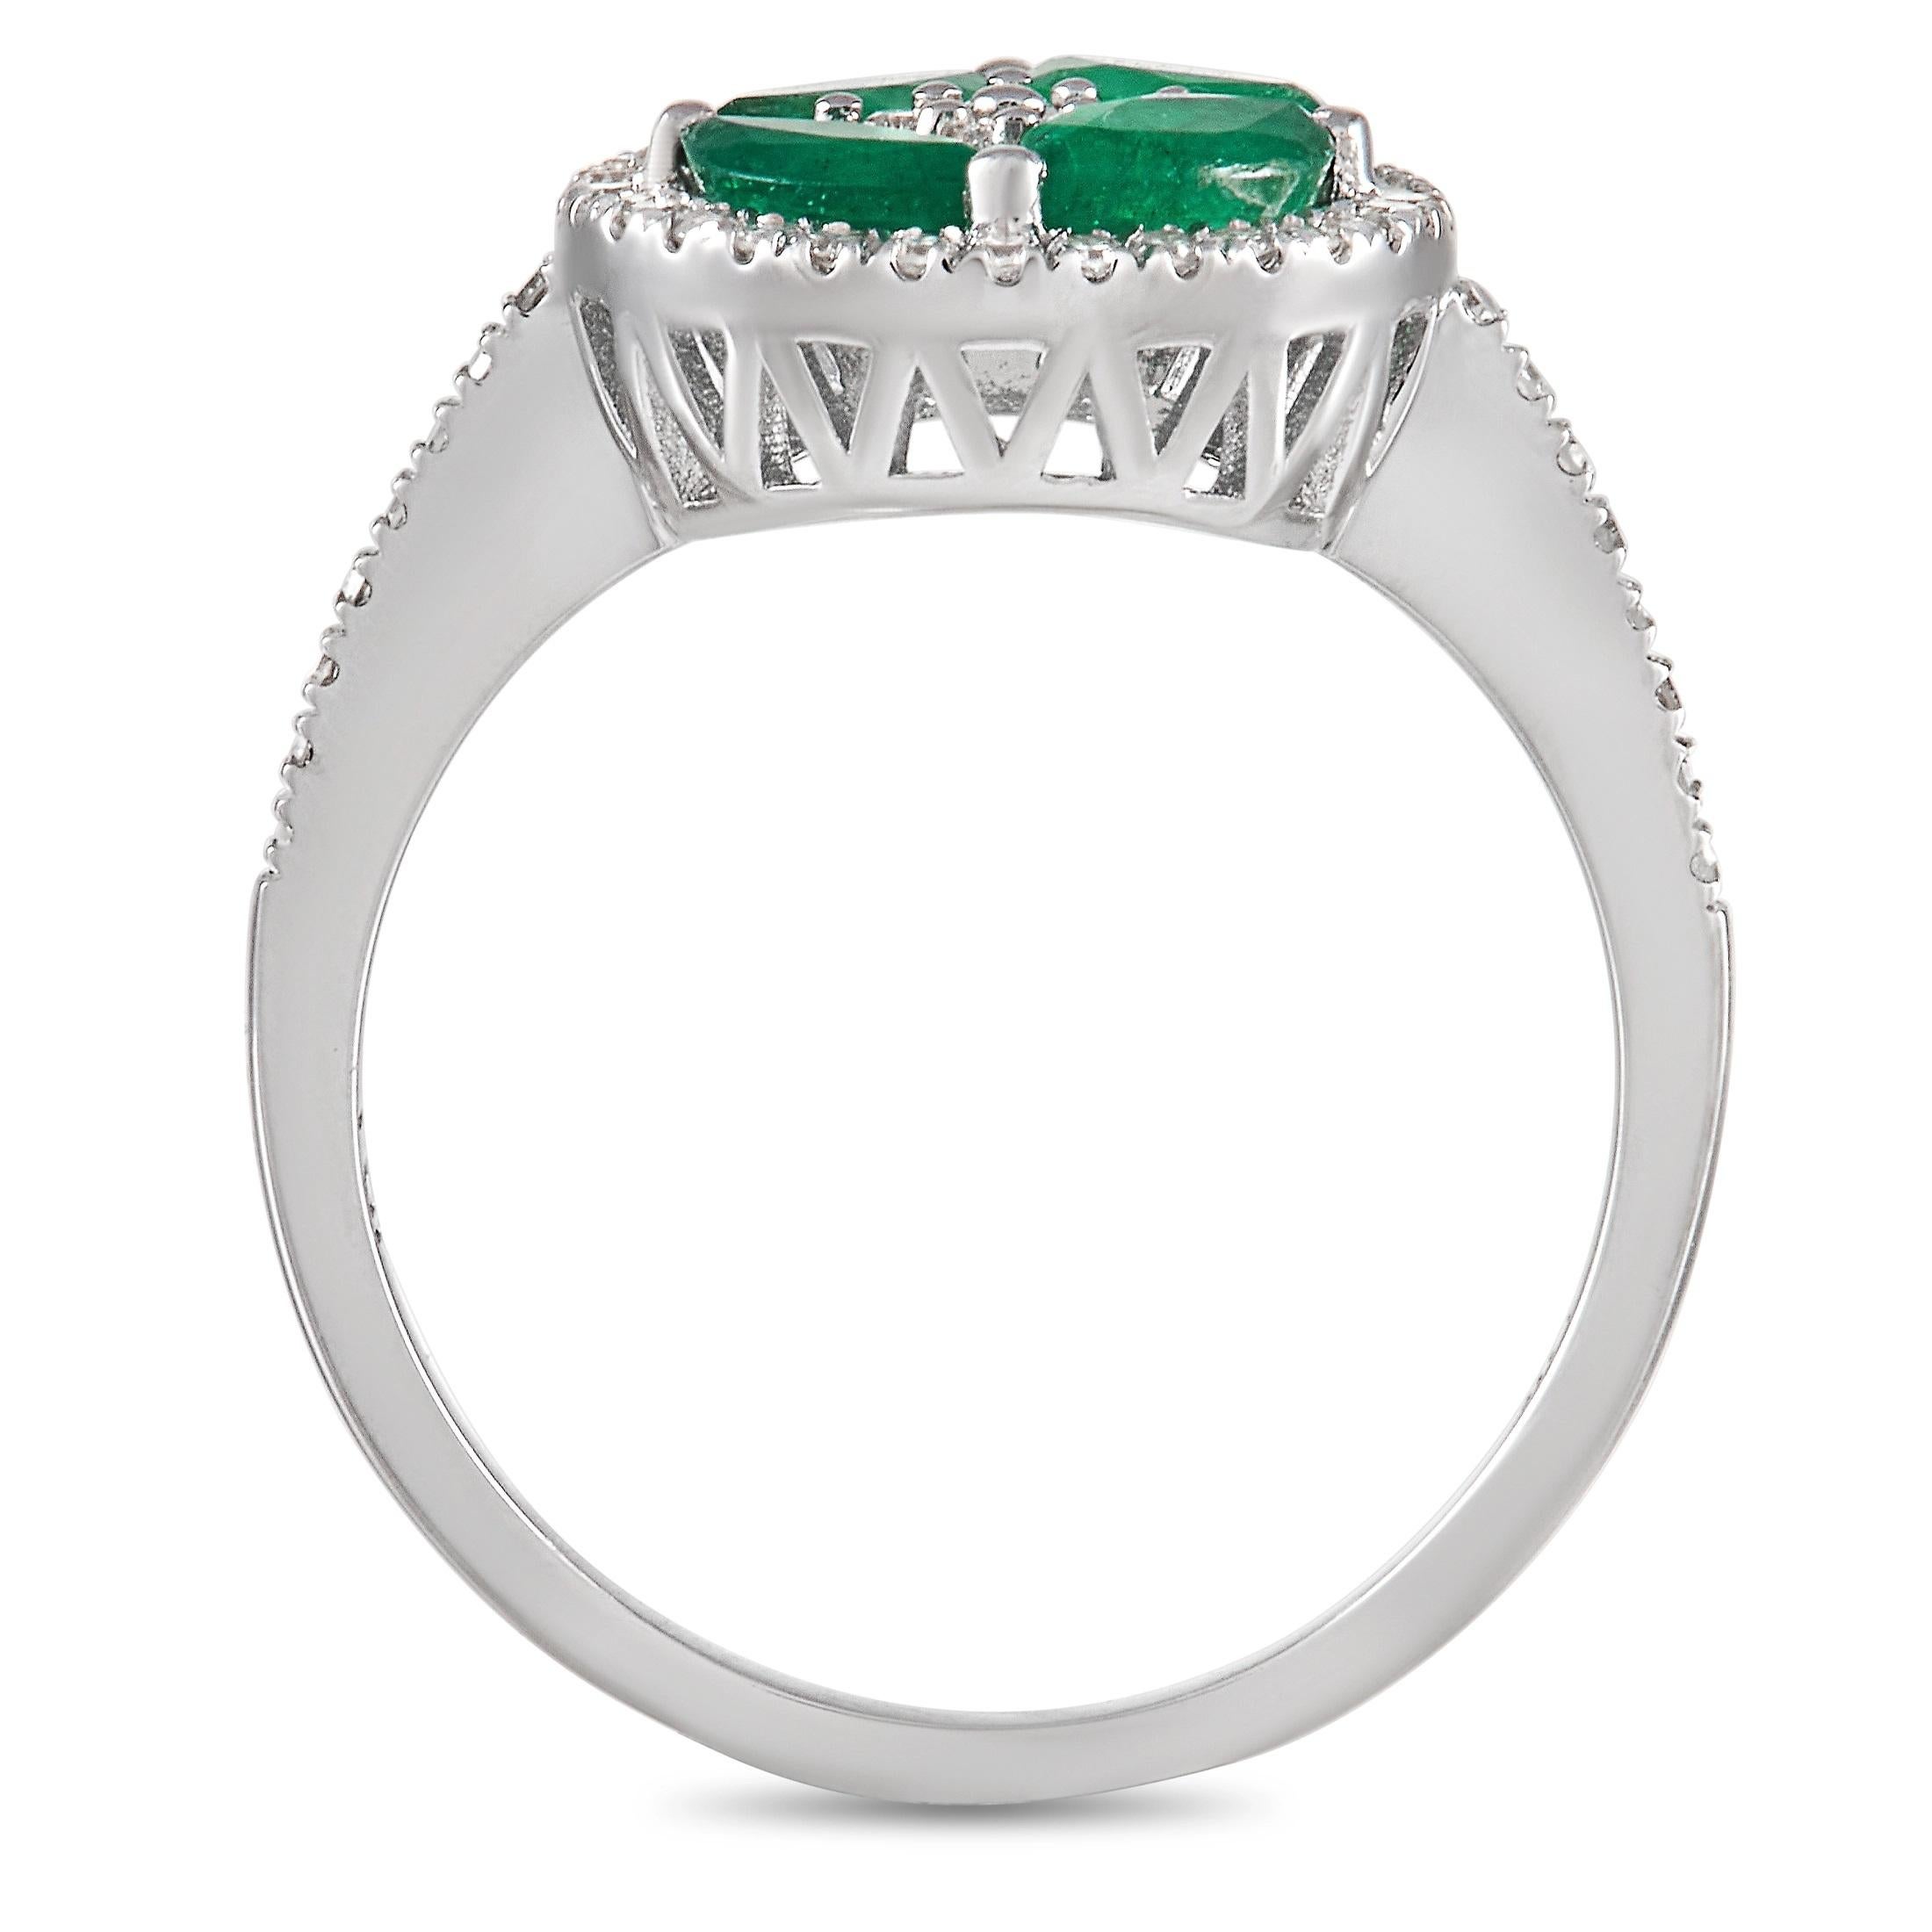 This ring is poised to continually make a stylish statement. At the center, a cluster of emeralds are effortlessly accented by shimmering diamonds totaling 0.33 carats. This piece’s elegant 14K White Gold setting features a 1mm wide band and a 5mm